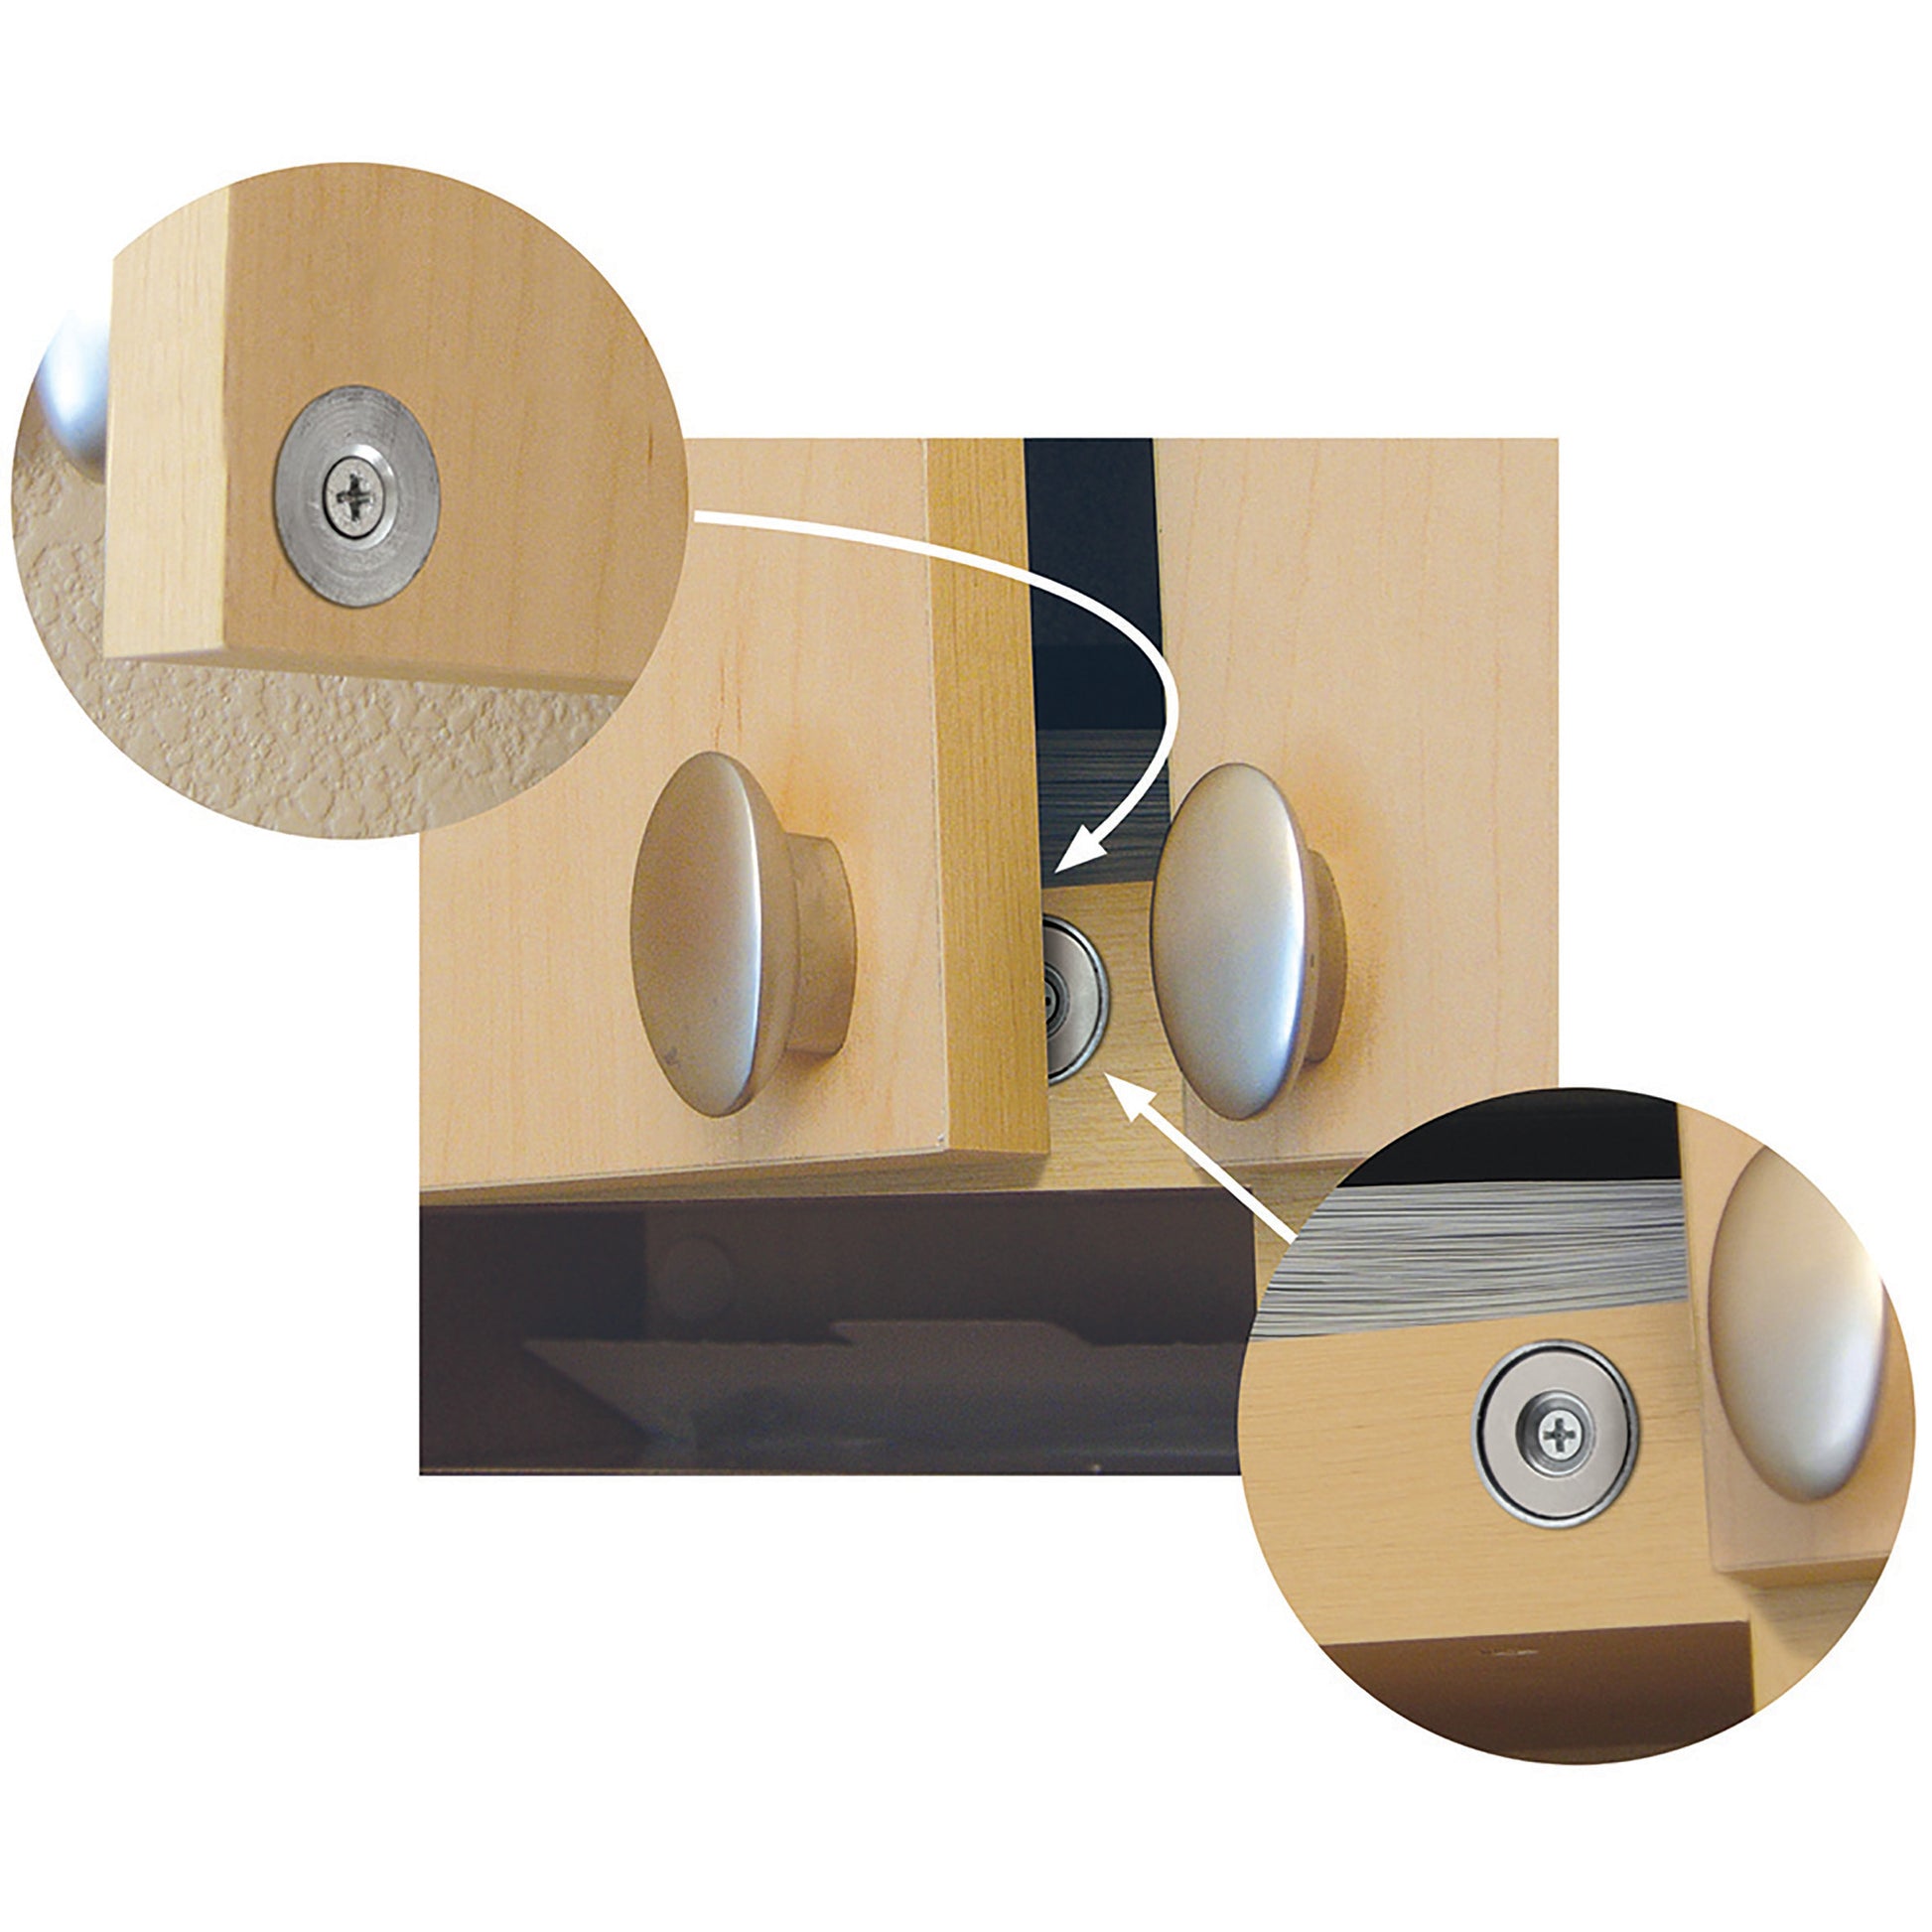 Load image into Gallery viewer, NMLKIT4 Neodymium Latch Magnet Kit (1 set) - In Use View Inside Cabinet Door